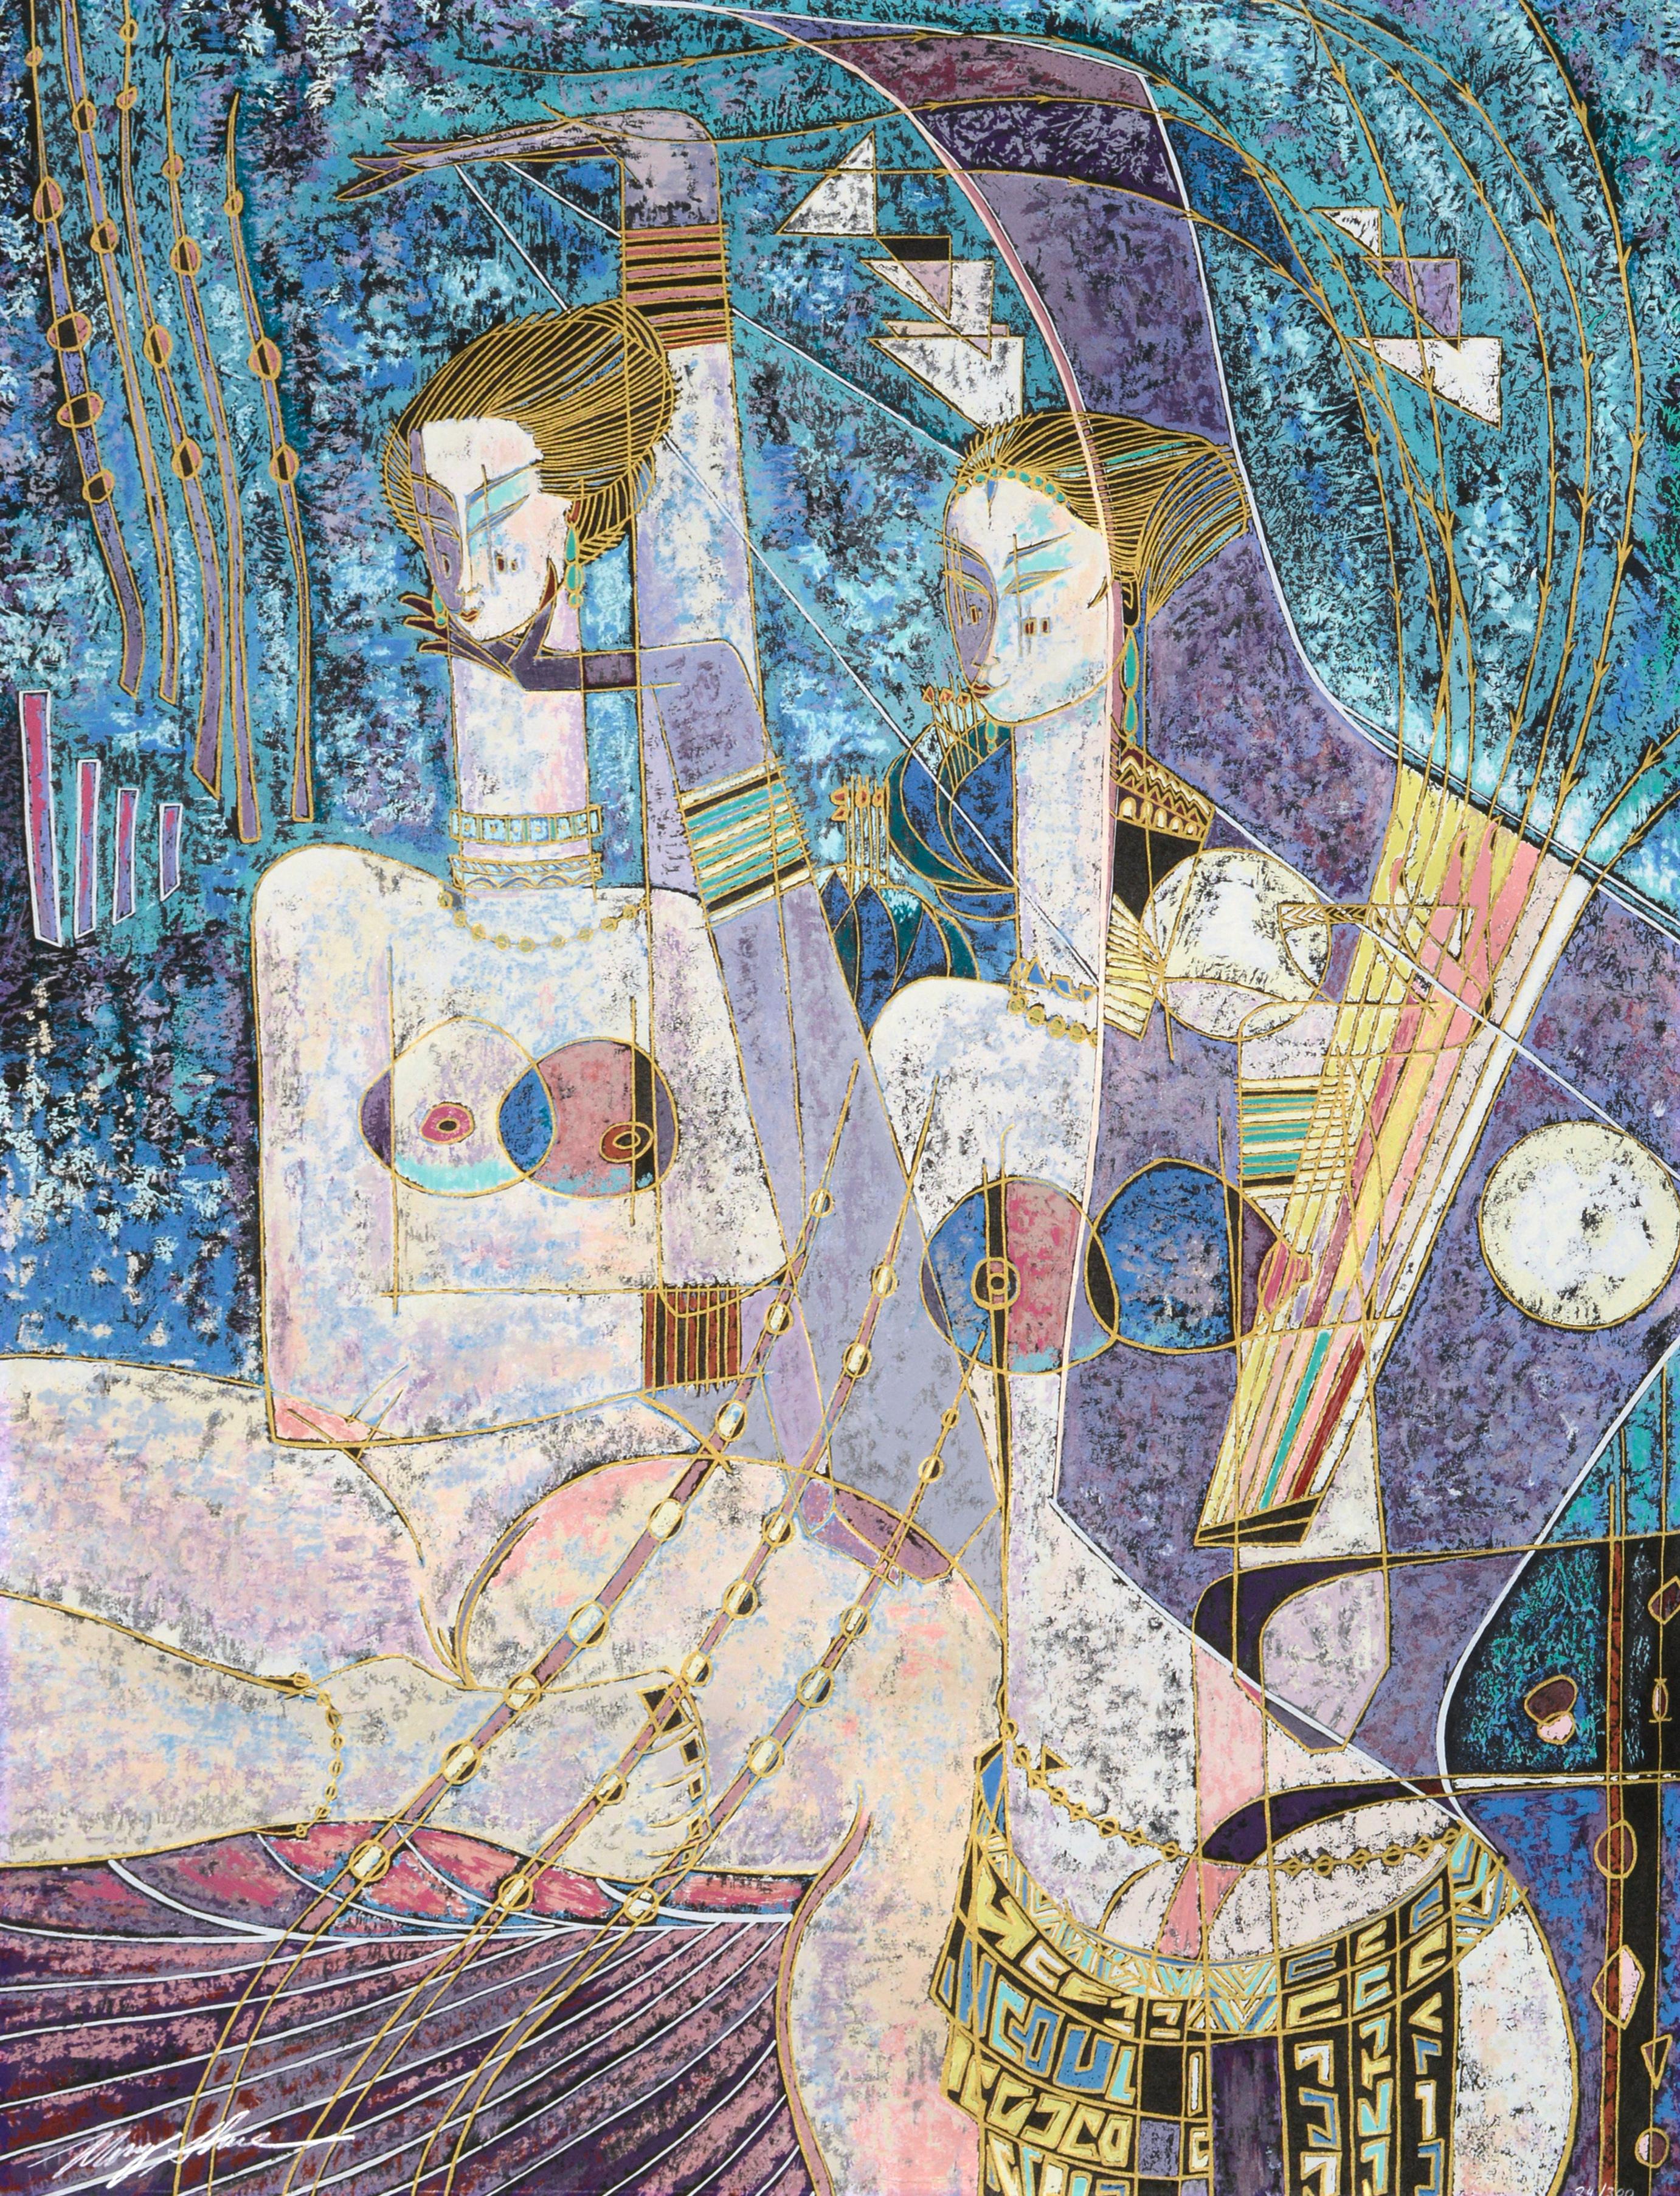 Abstract Figurative - Stylized Goddesses  - Print by Adrian Wong Shue